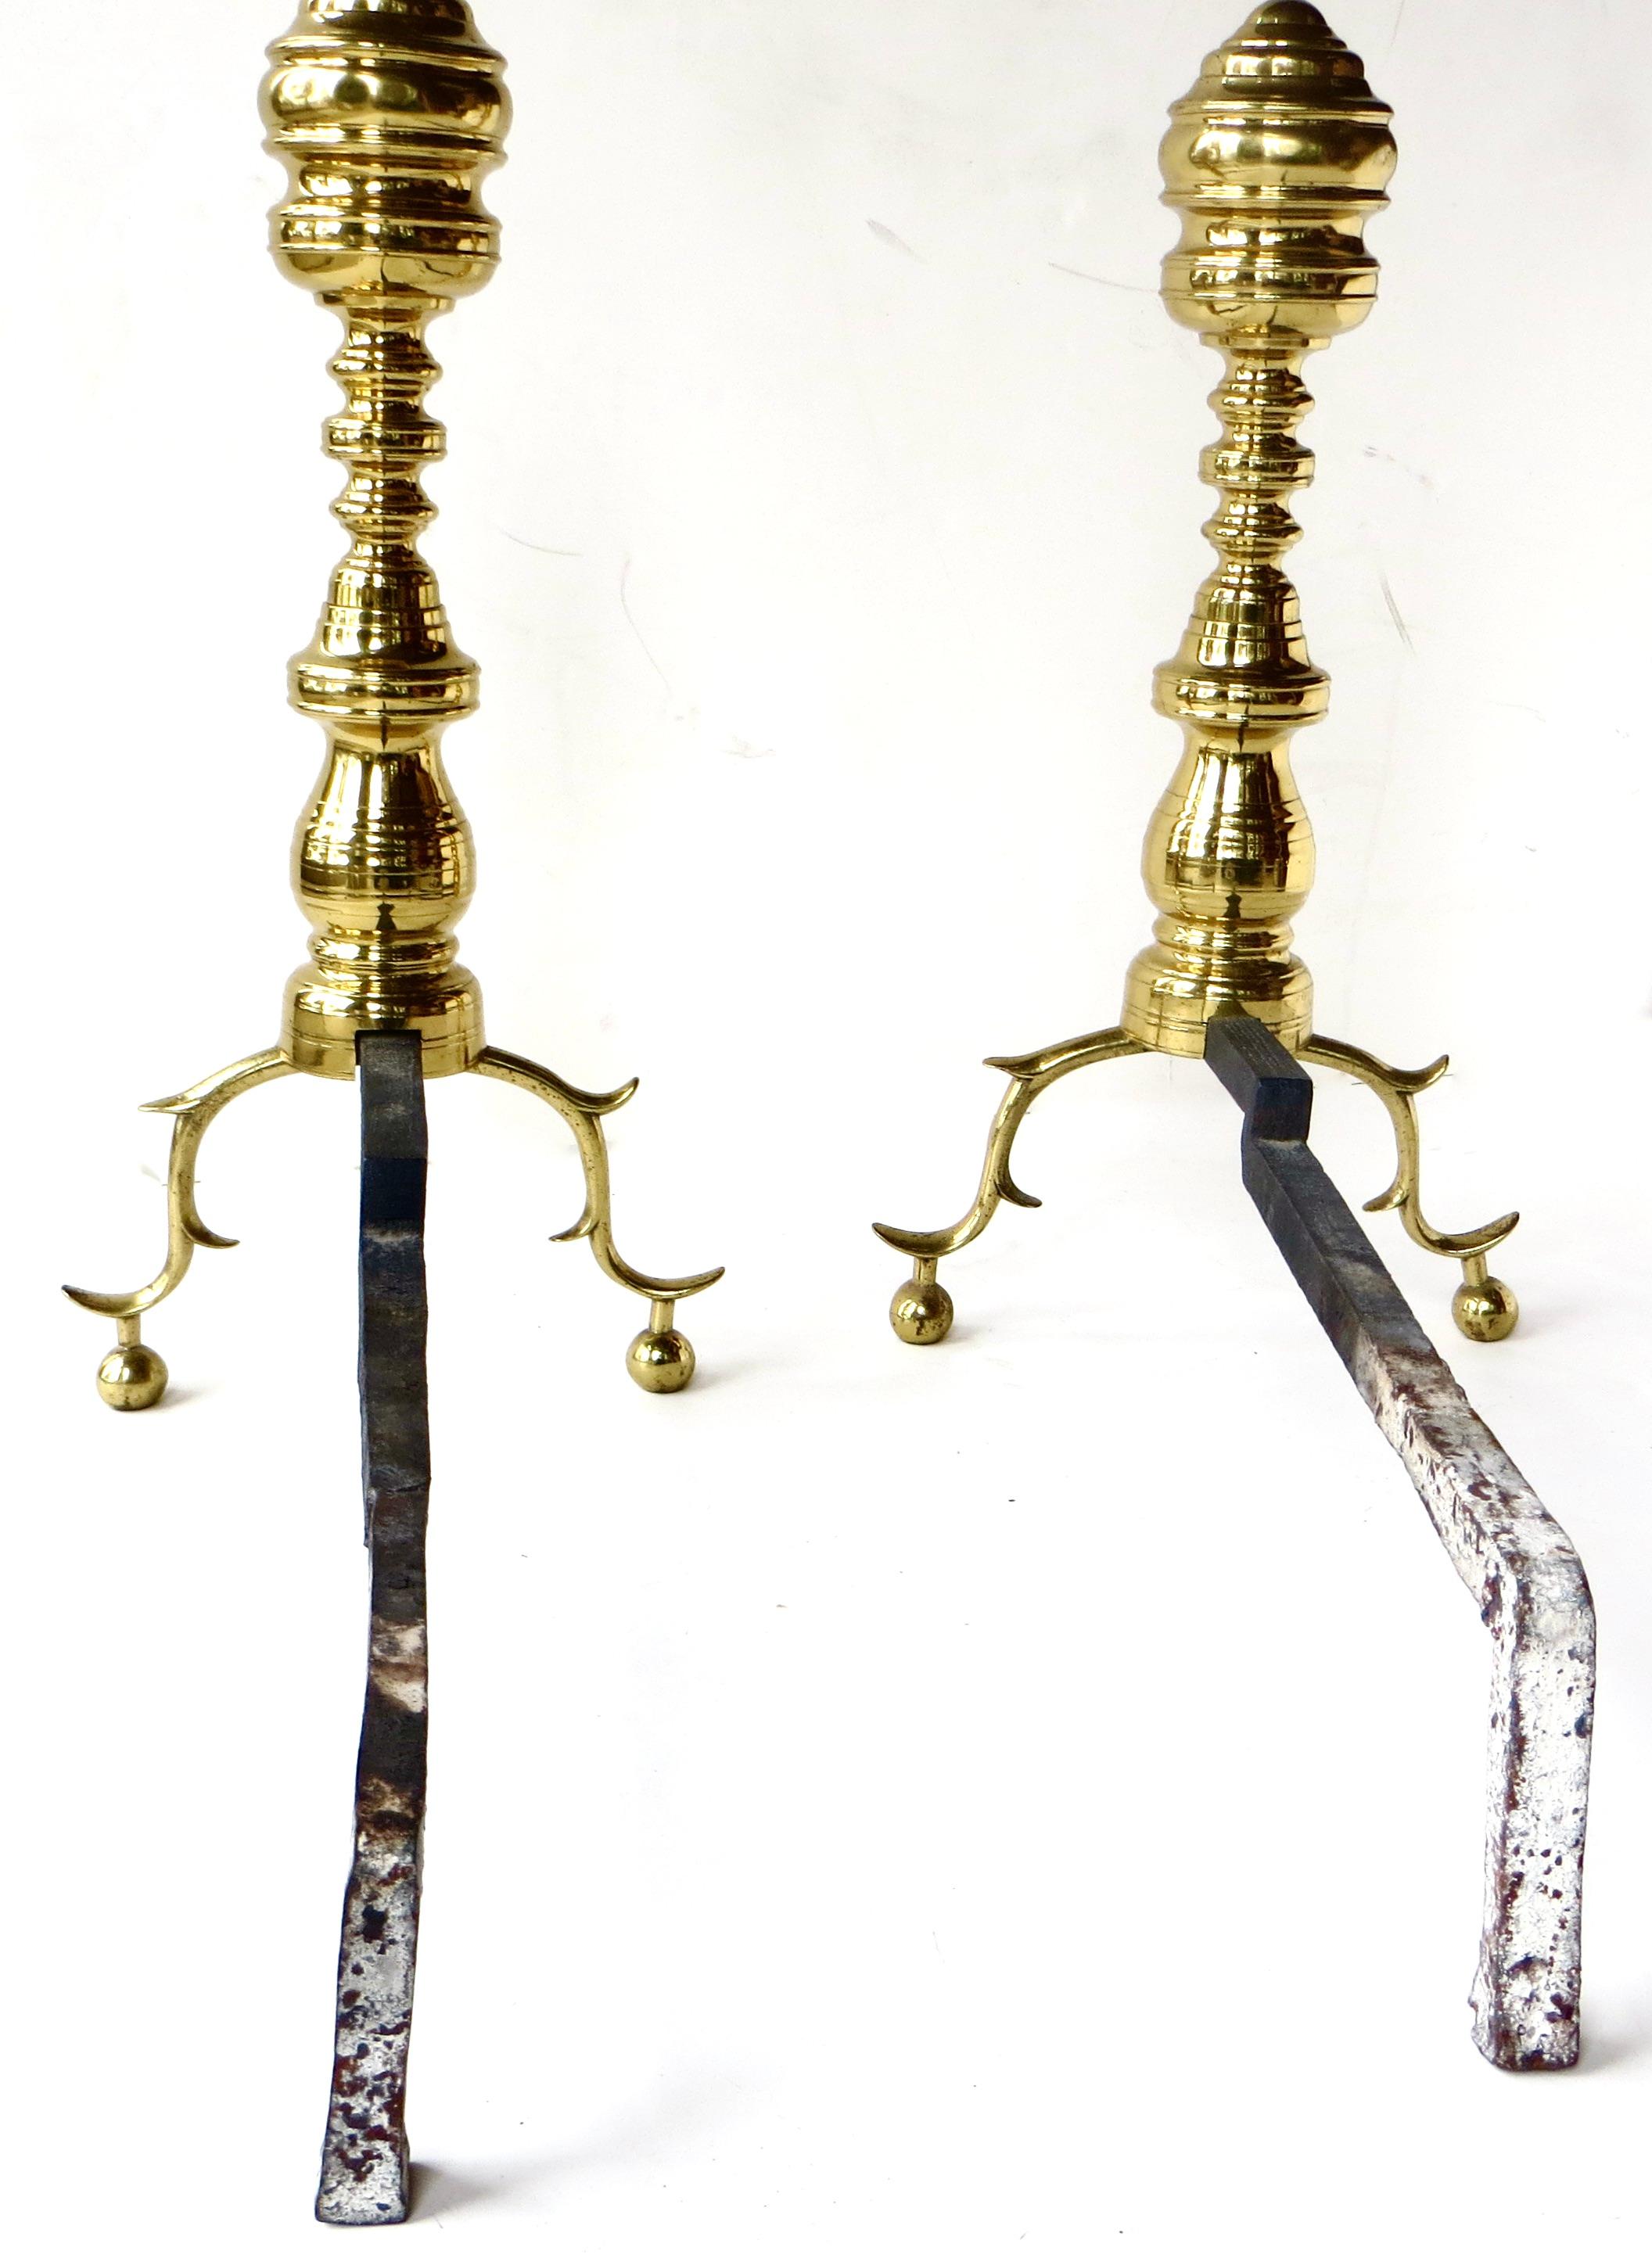 Lovely original surface to these pair of classical Victorian solid brass andirons, with bold vertical turned and bulbous design to the post; connected below to horizontal iron log supports (billet bar). A vertical hand forged threaded rod goes up